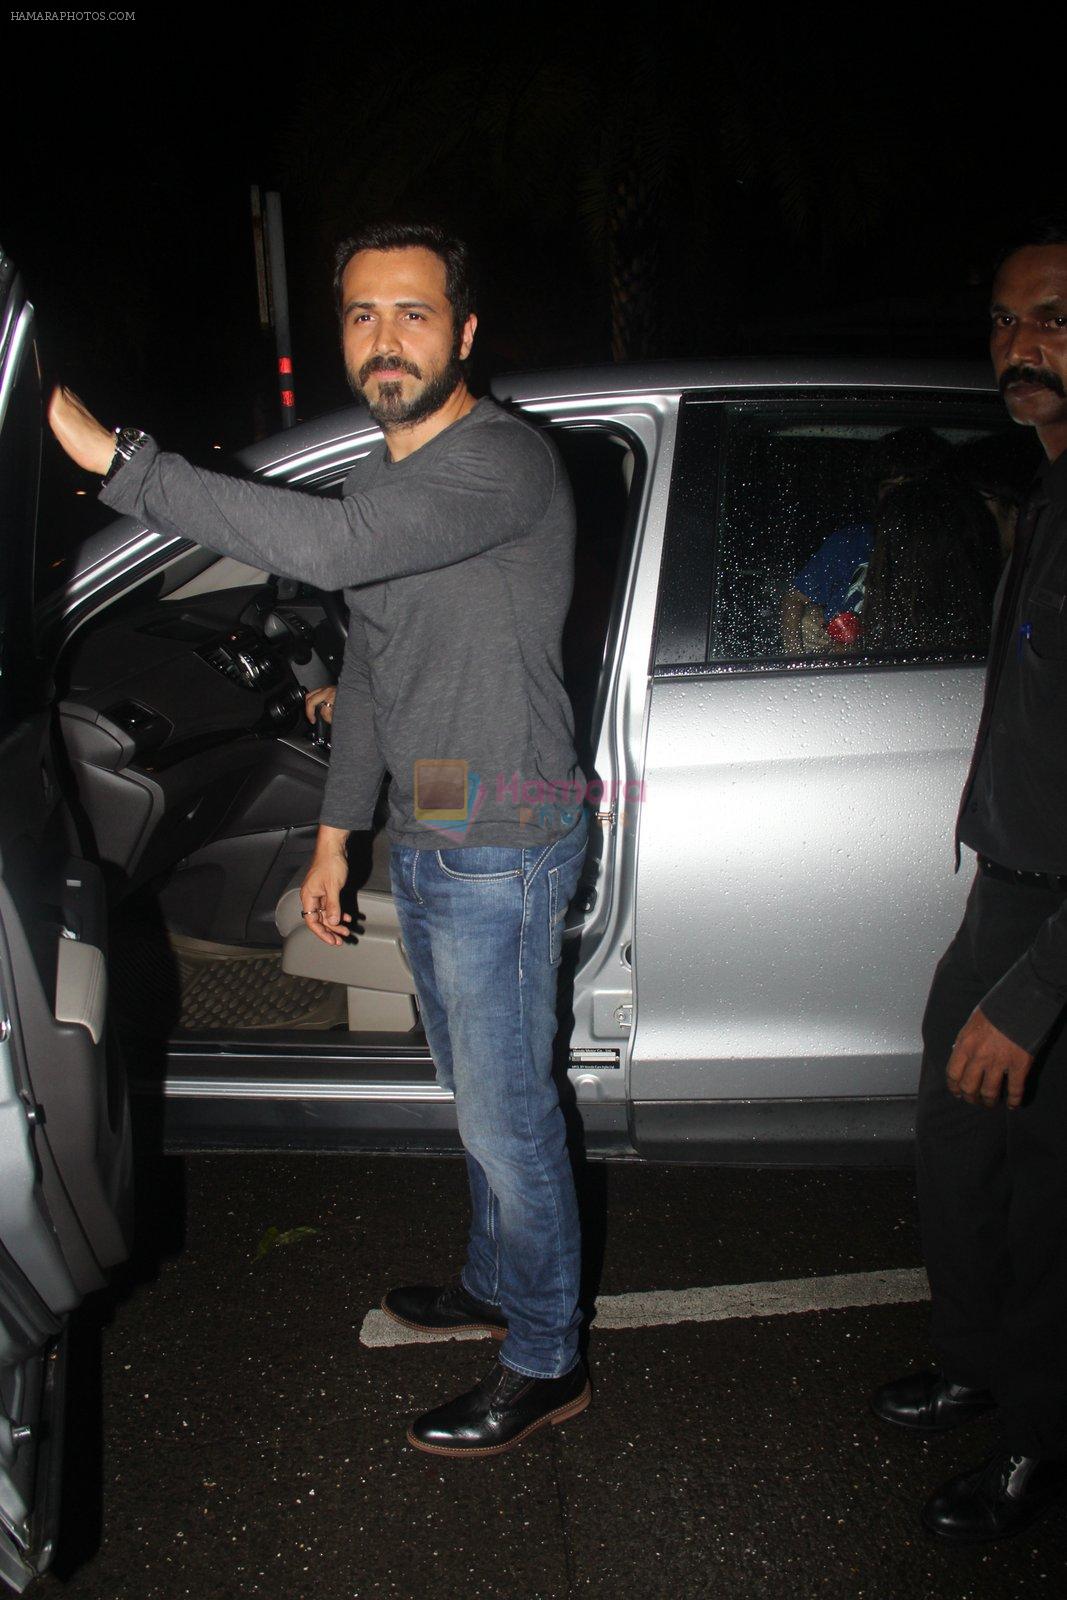 Emraan Hashmi snapped in BKC for dinner on 8th July 2016